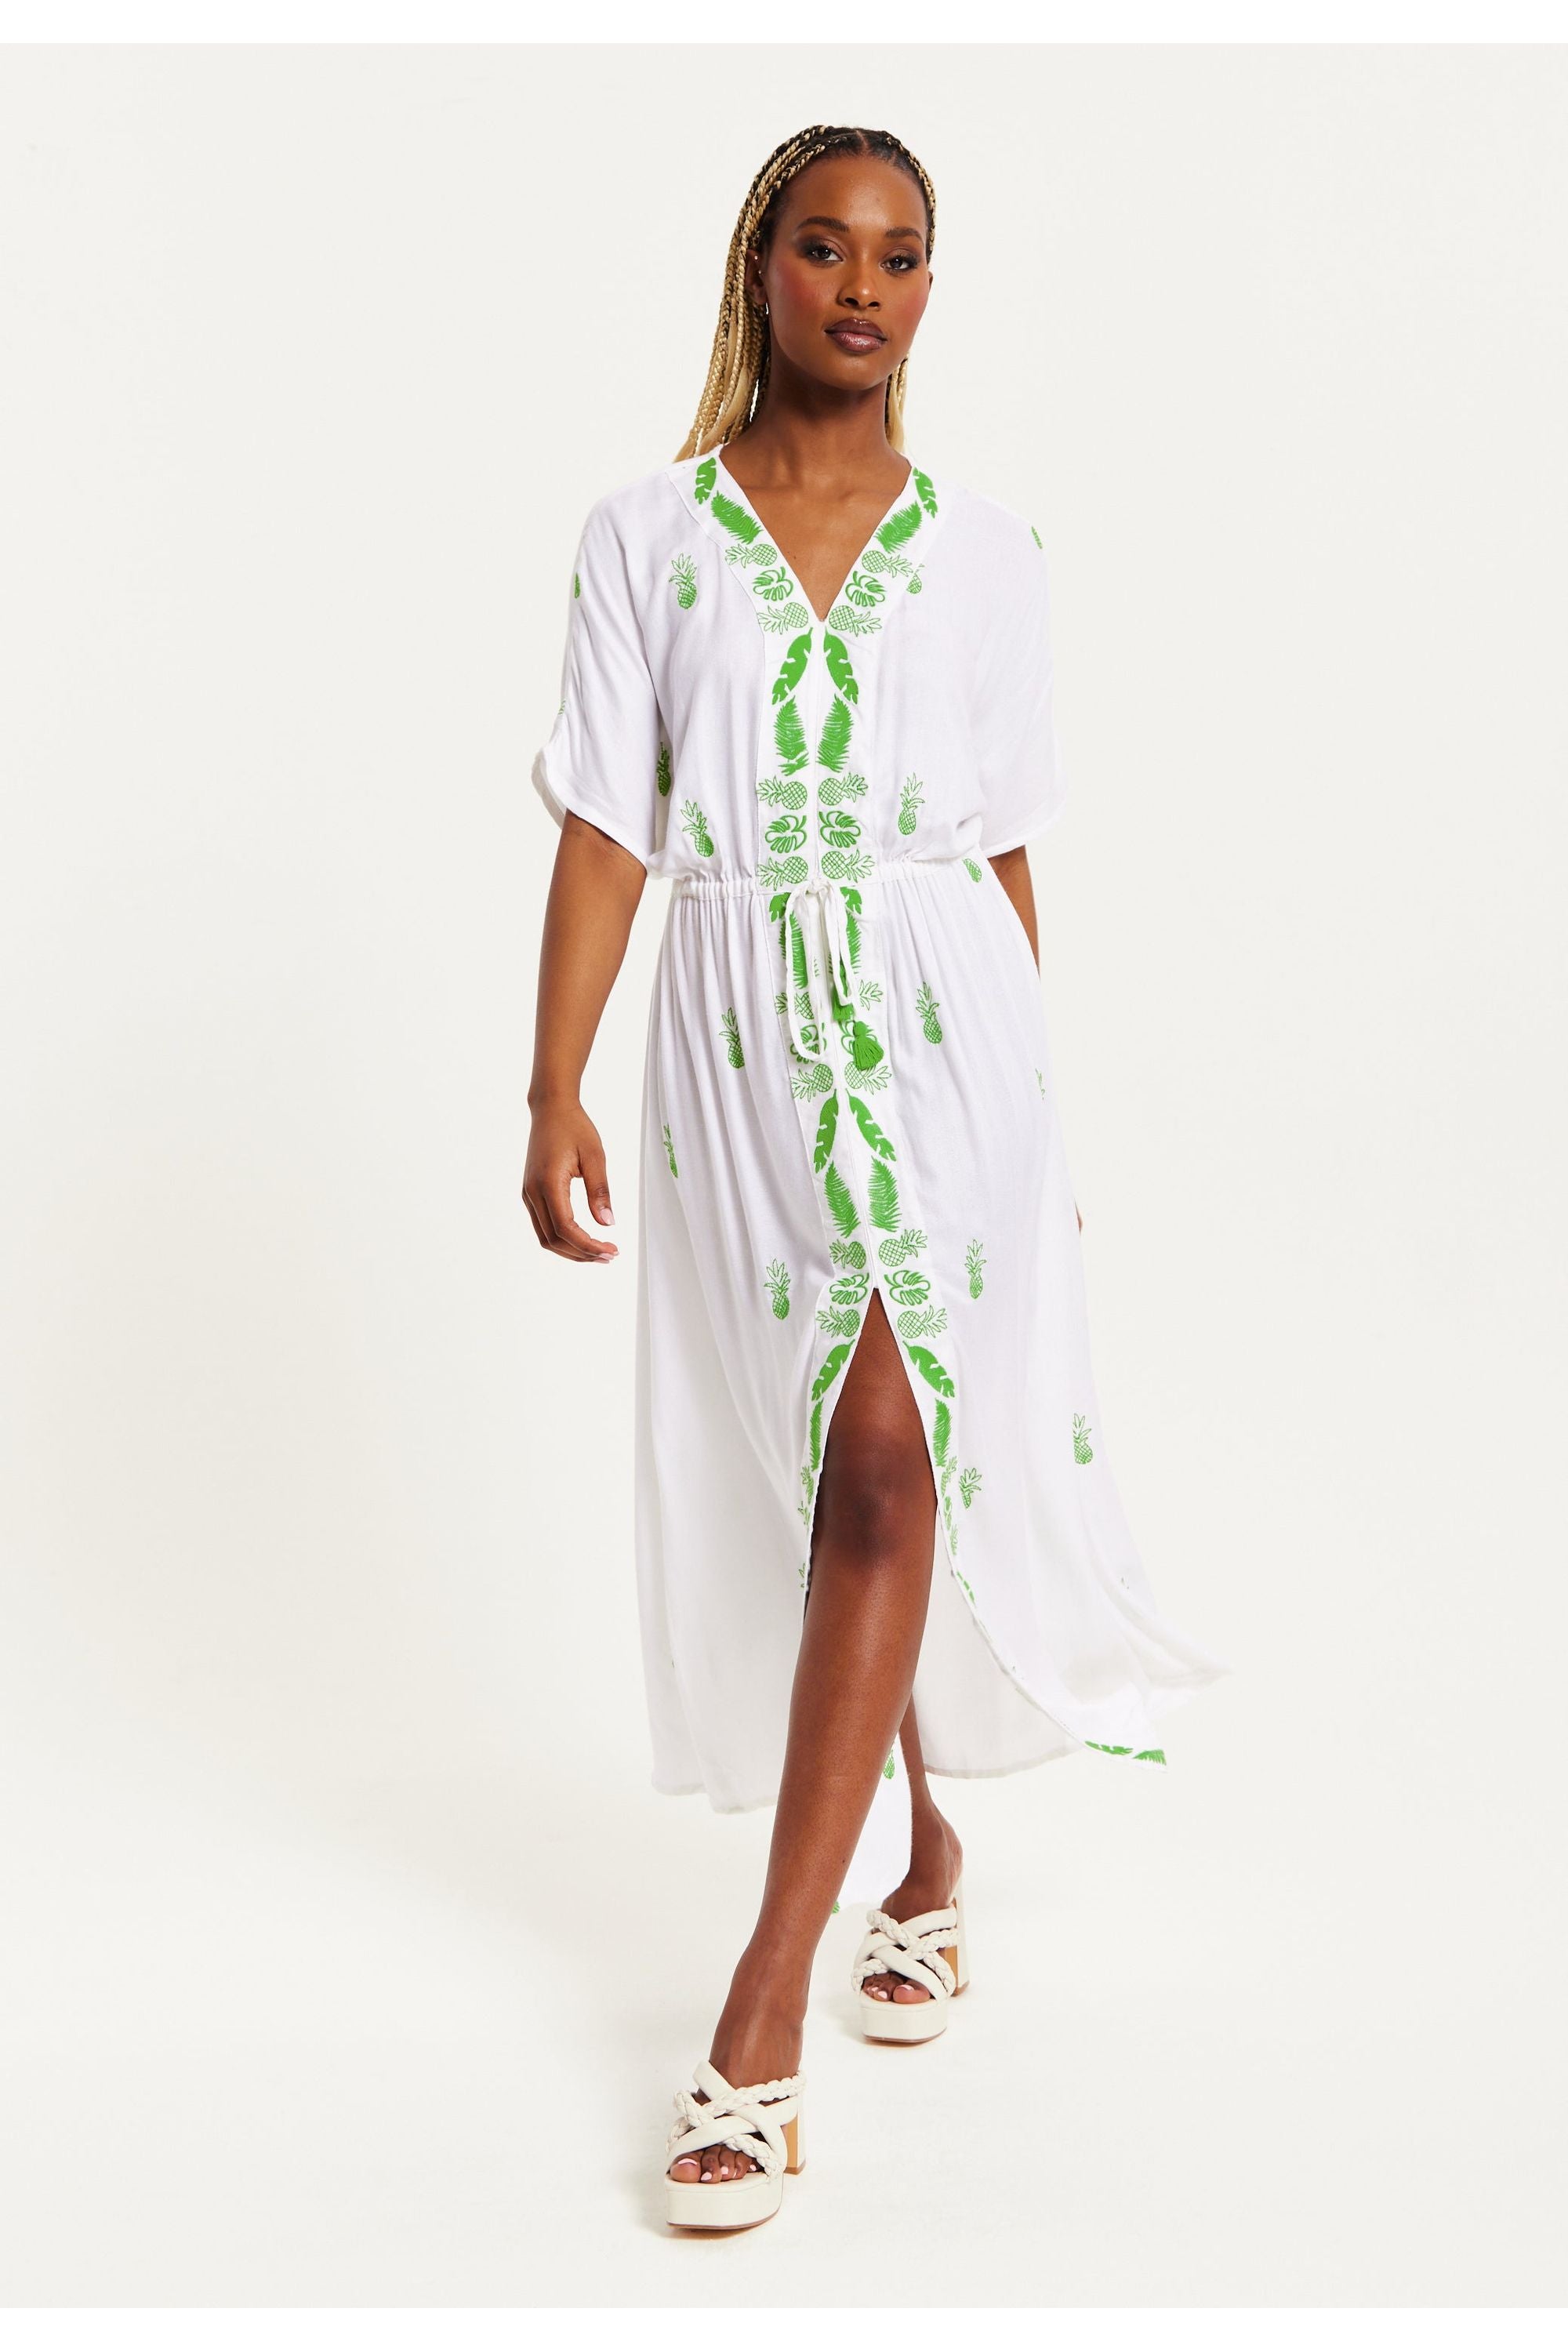 White Maxi Beach Dress With Green Embroidery A9-SNK21W001G